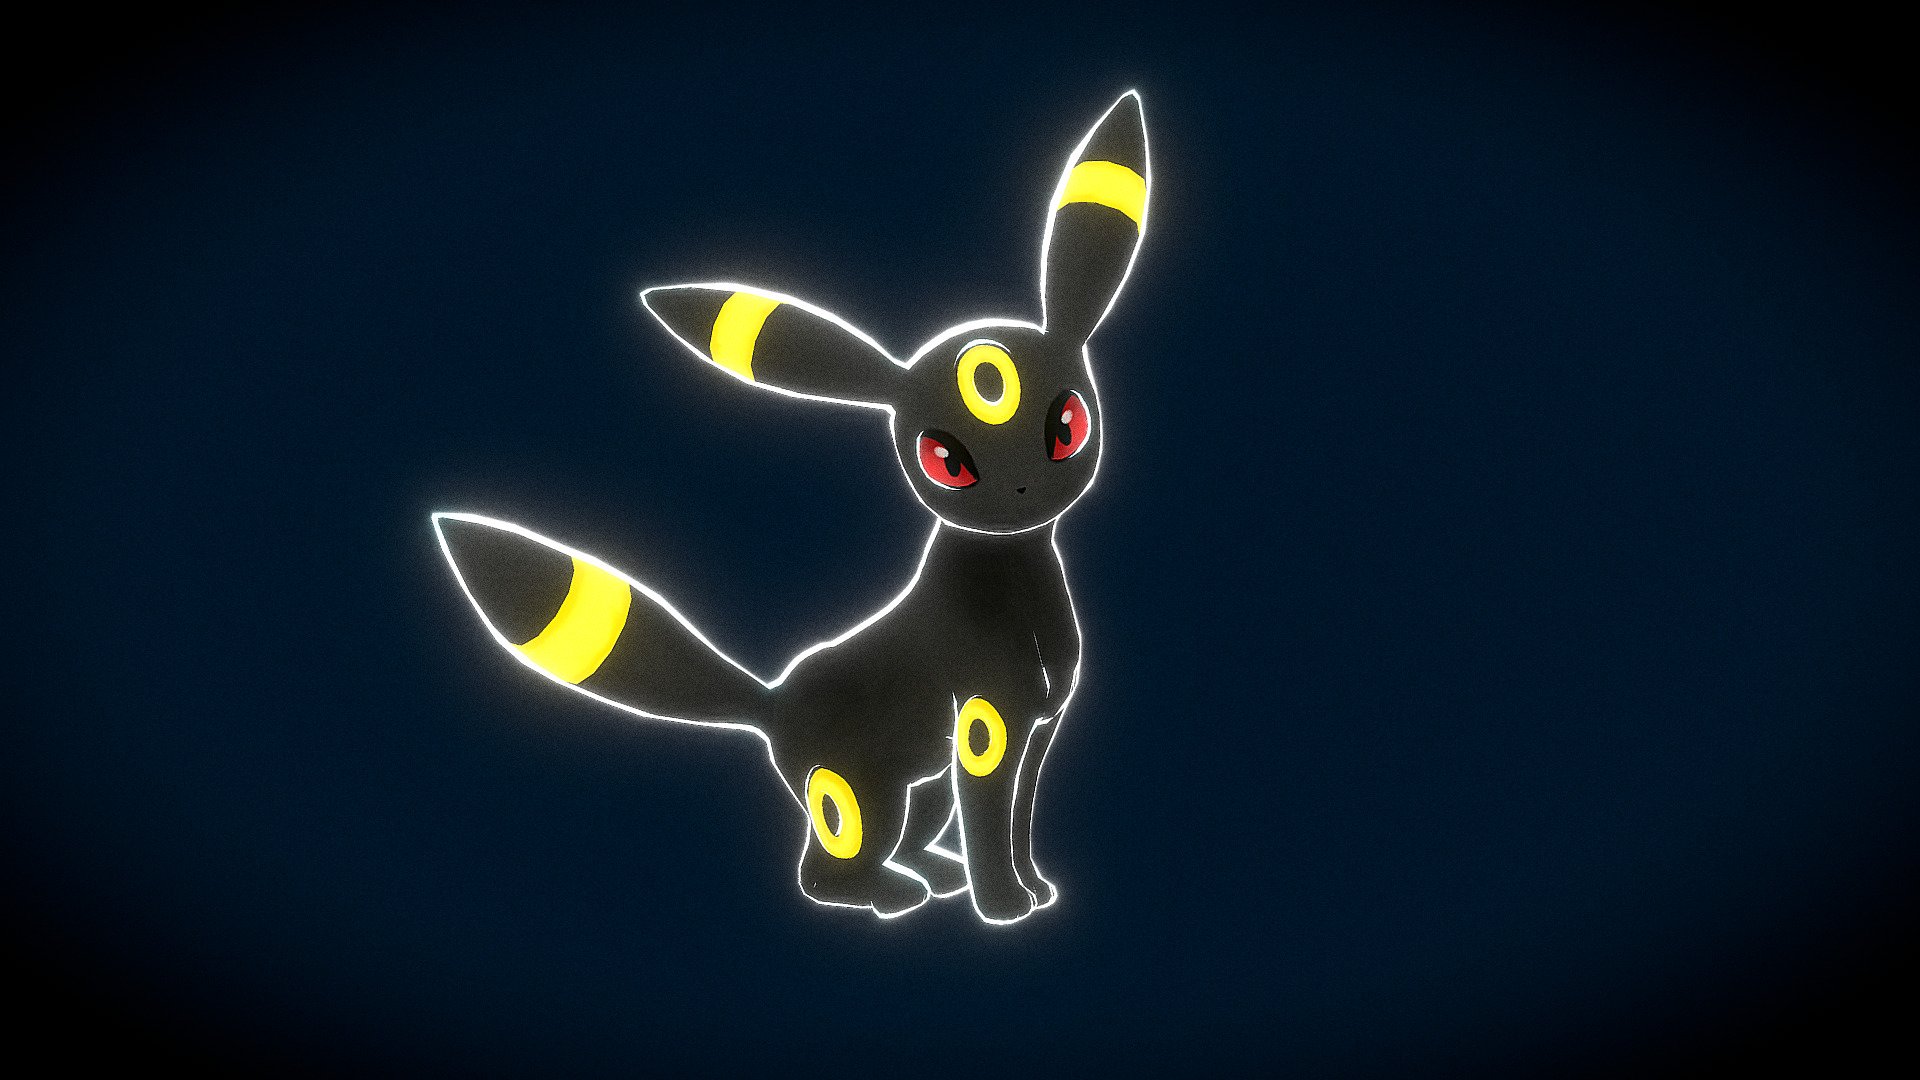 Little 3D model of a Pokemon named Umbreon. Model has a rig and can be animated. Textures are handpainted and it has cellshading.

This is one of many Eevee evolutions in Pokemon 3d model